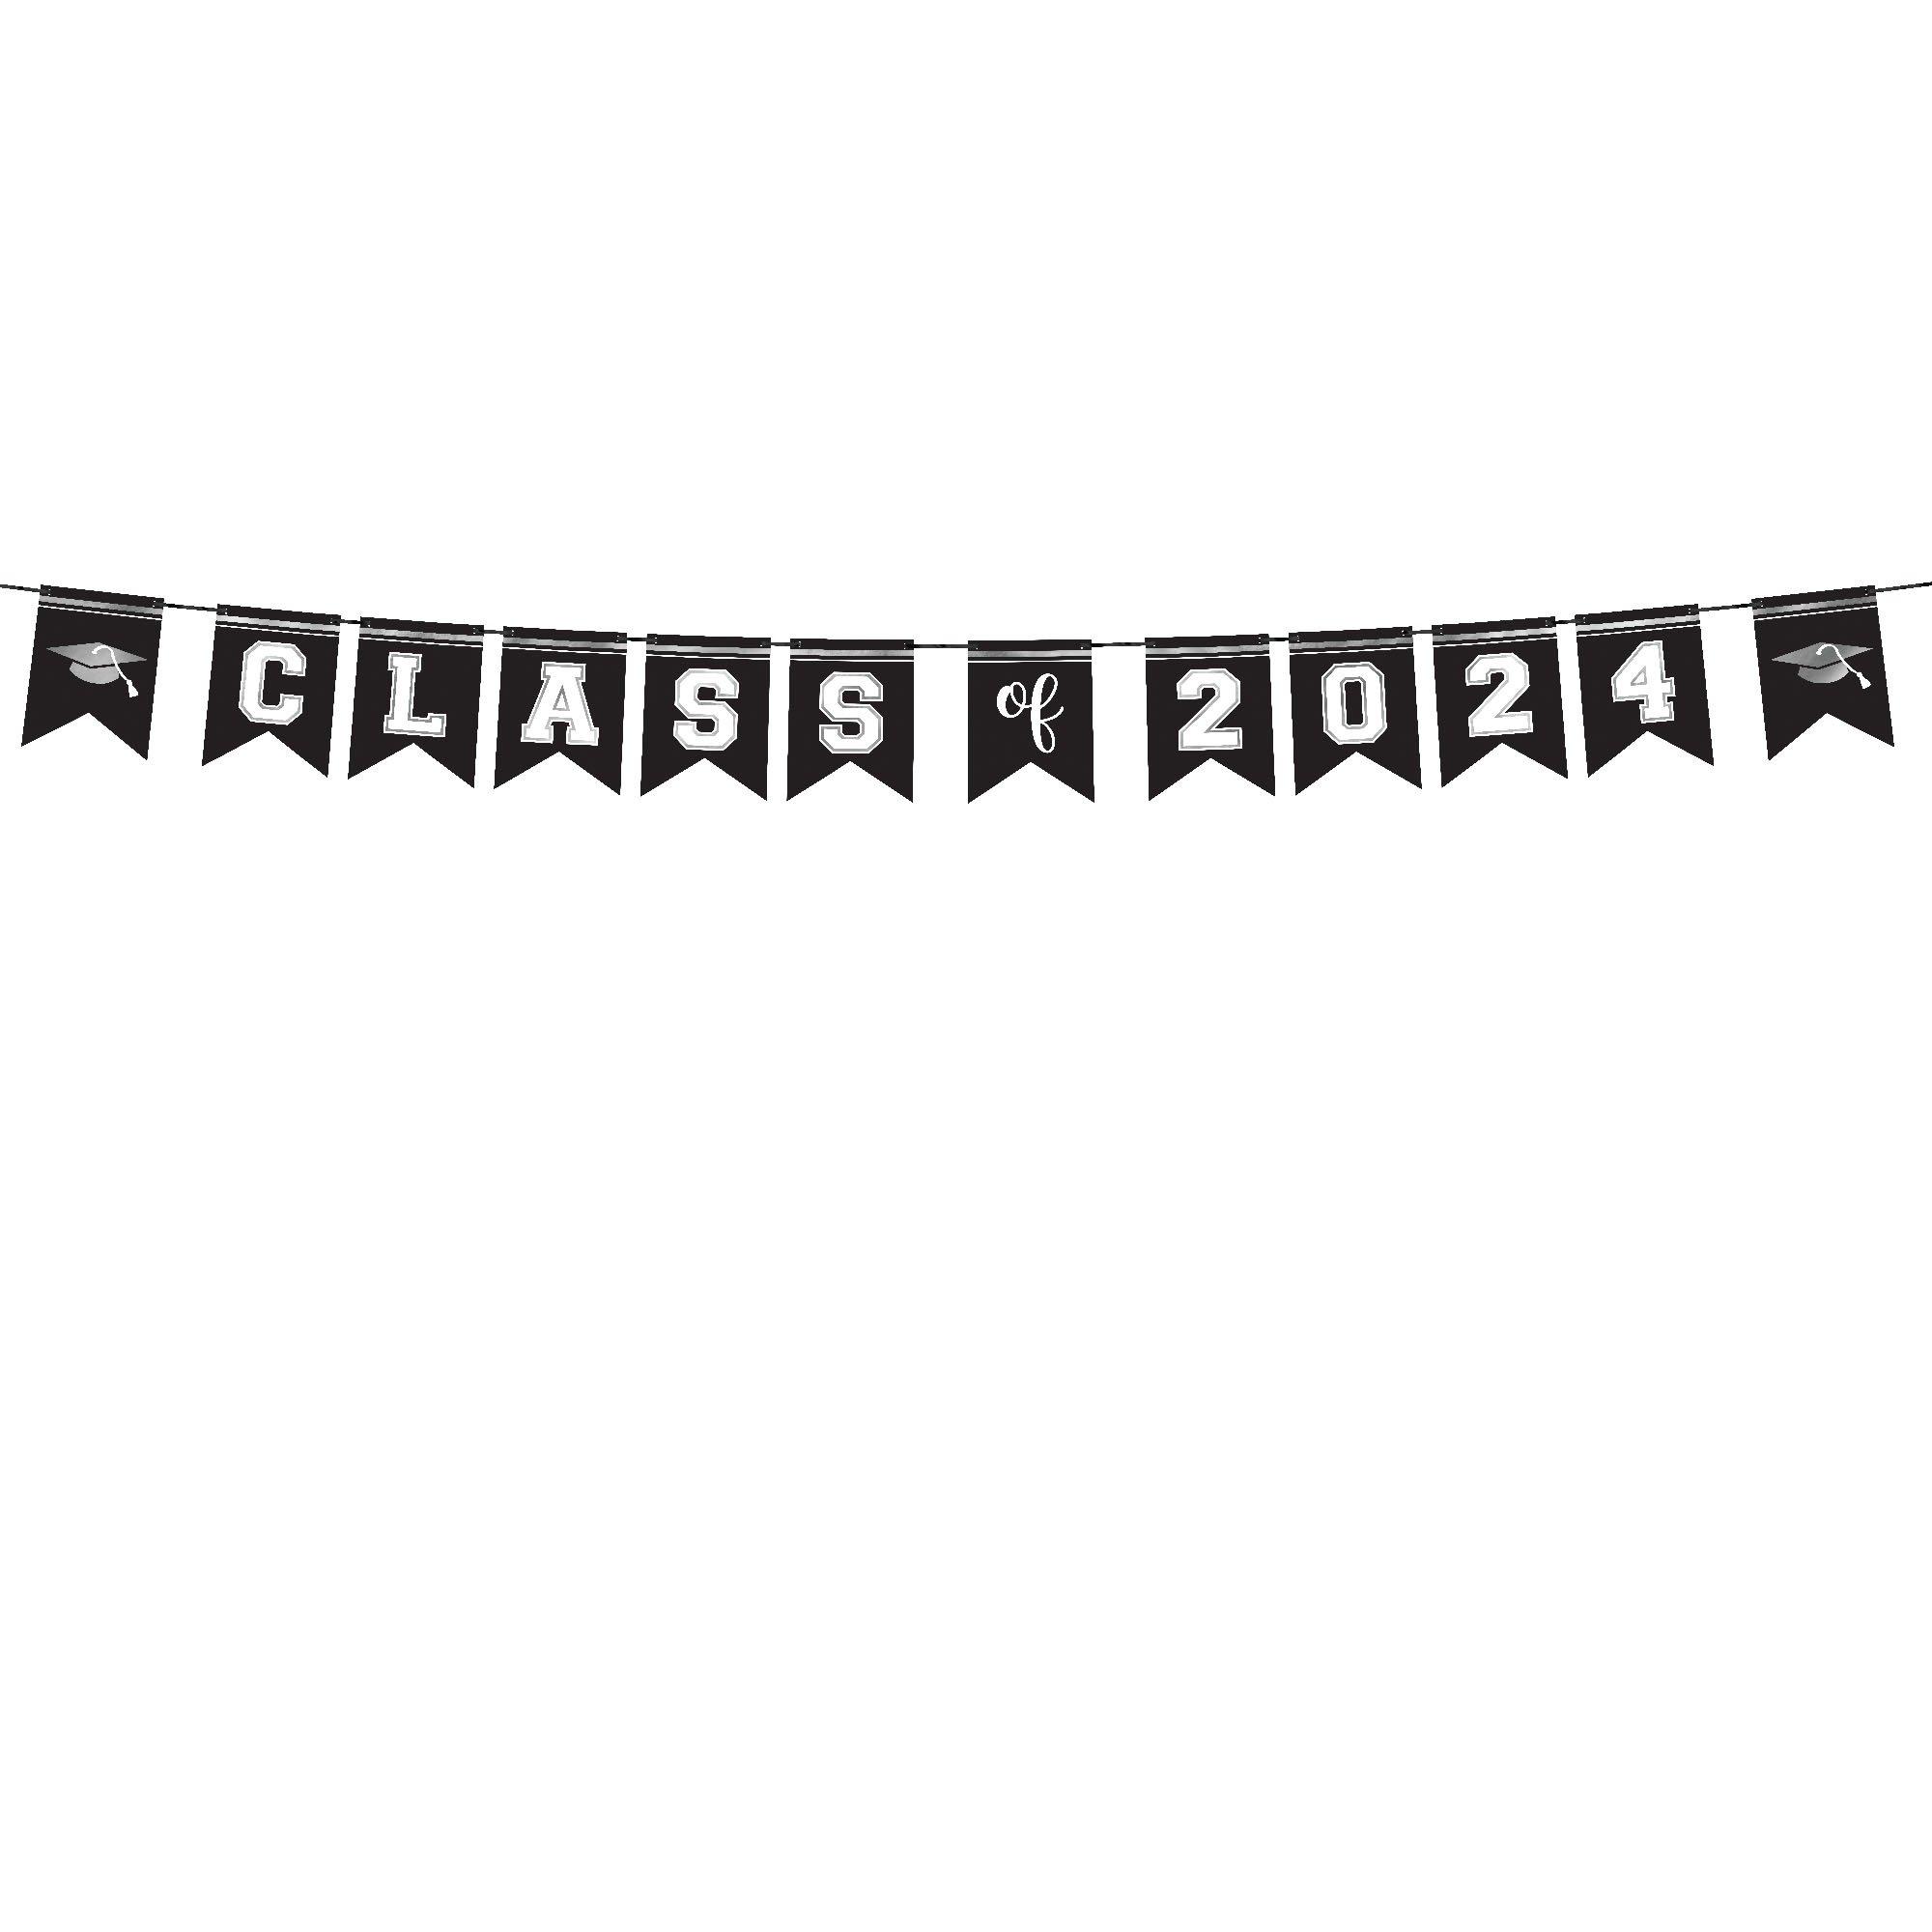 White Class of 2023 Graduation Cardstock Pennant Banner, 12ft